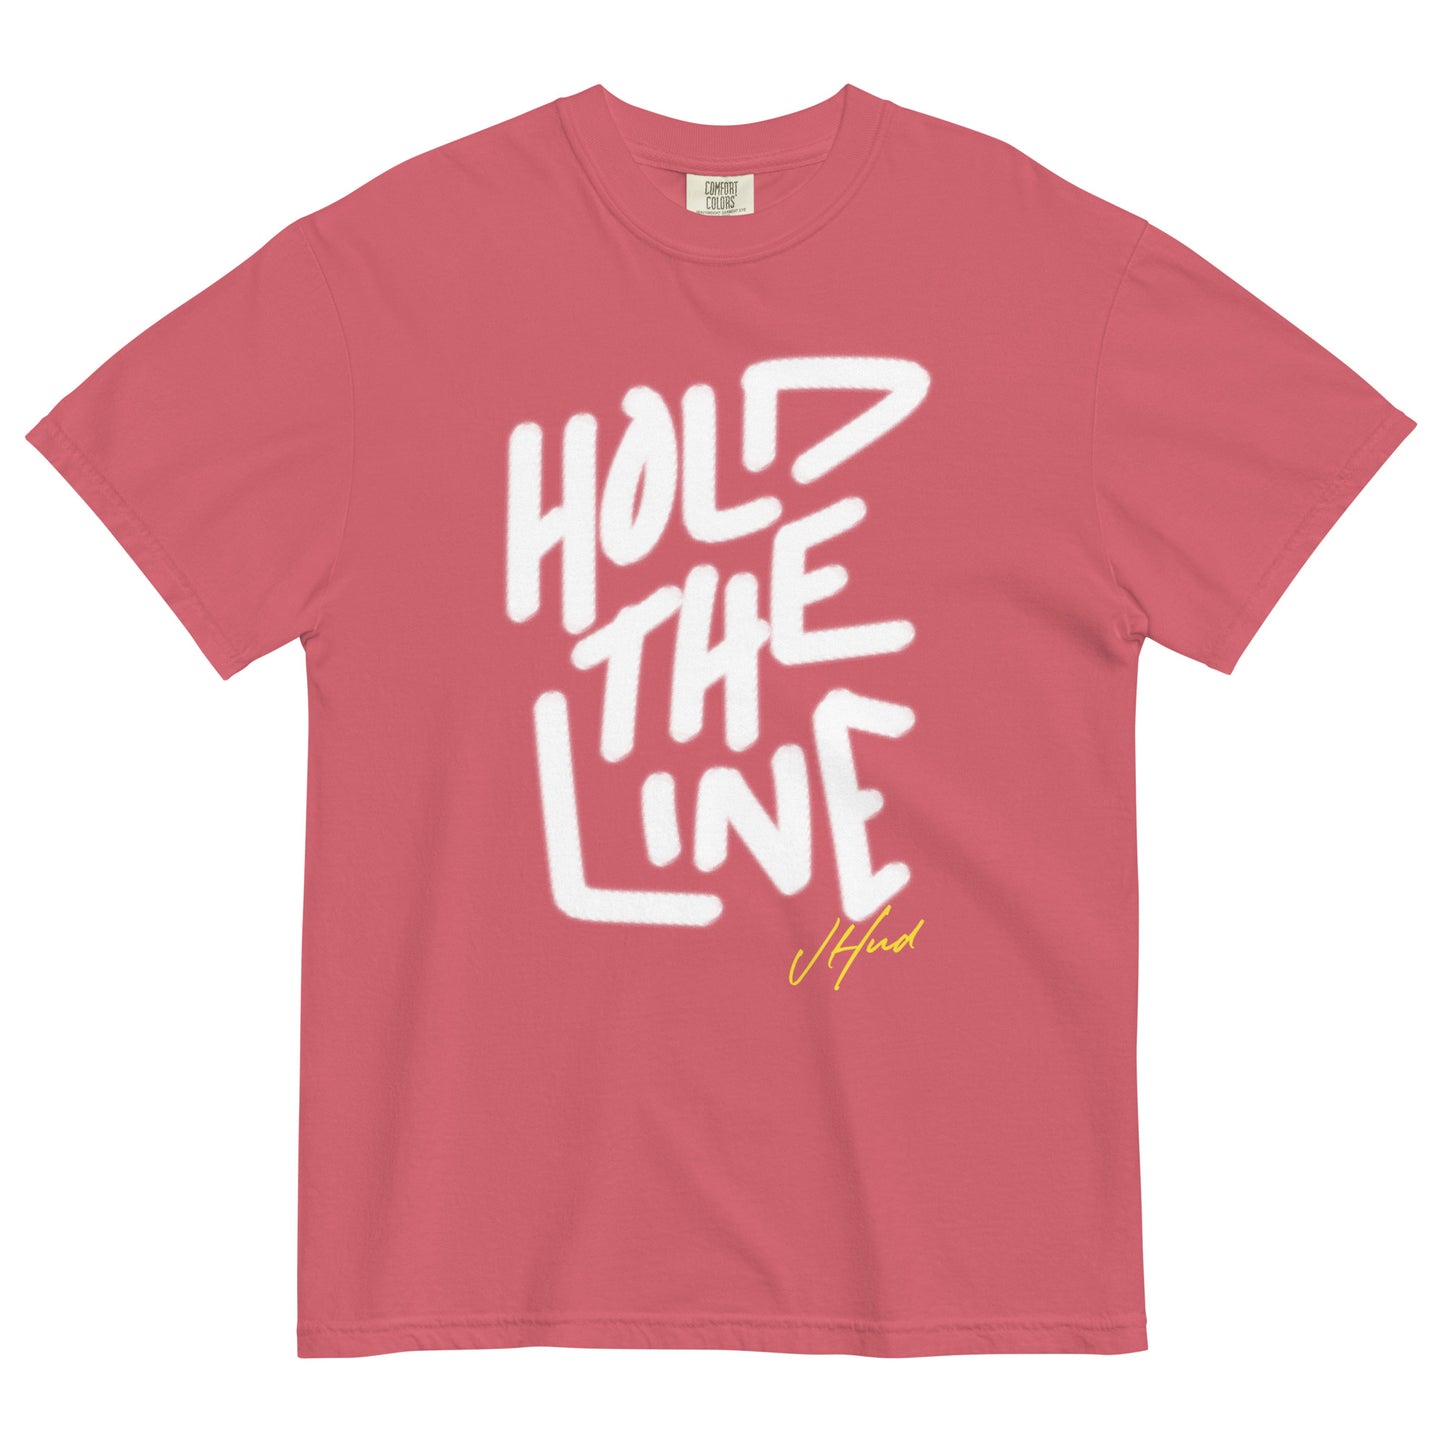 Hold the Line Heavyweight T-Shirt - Violet